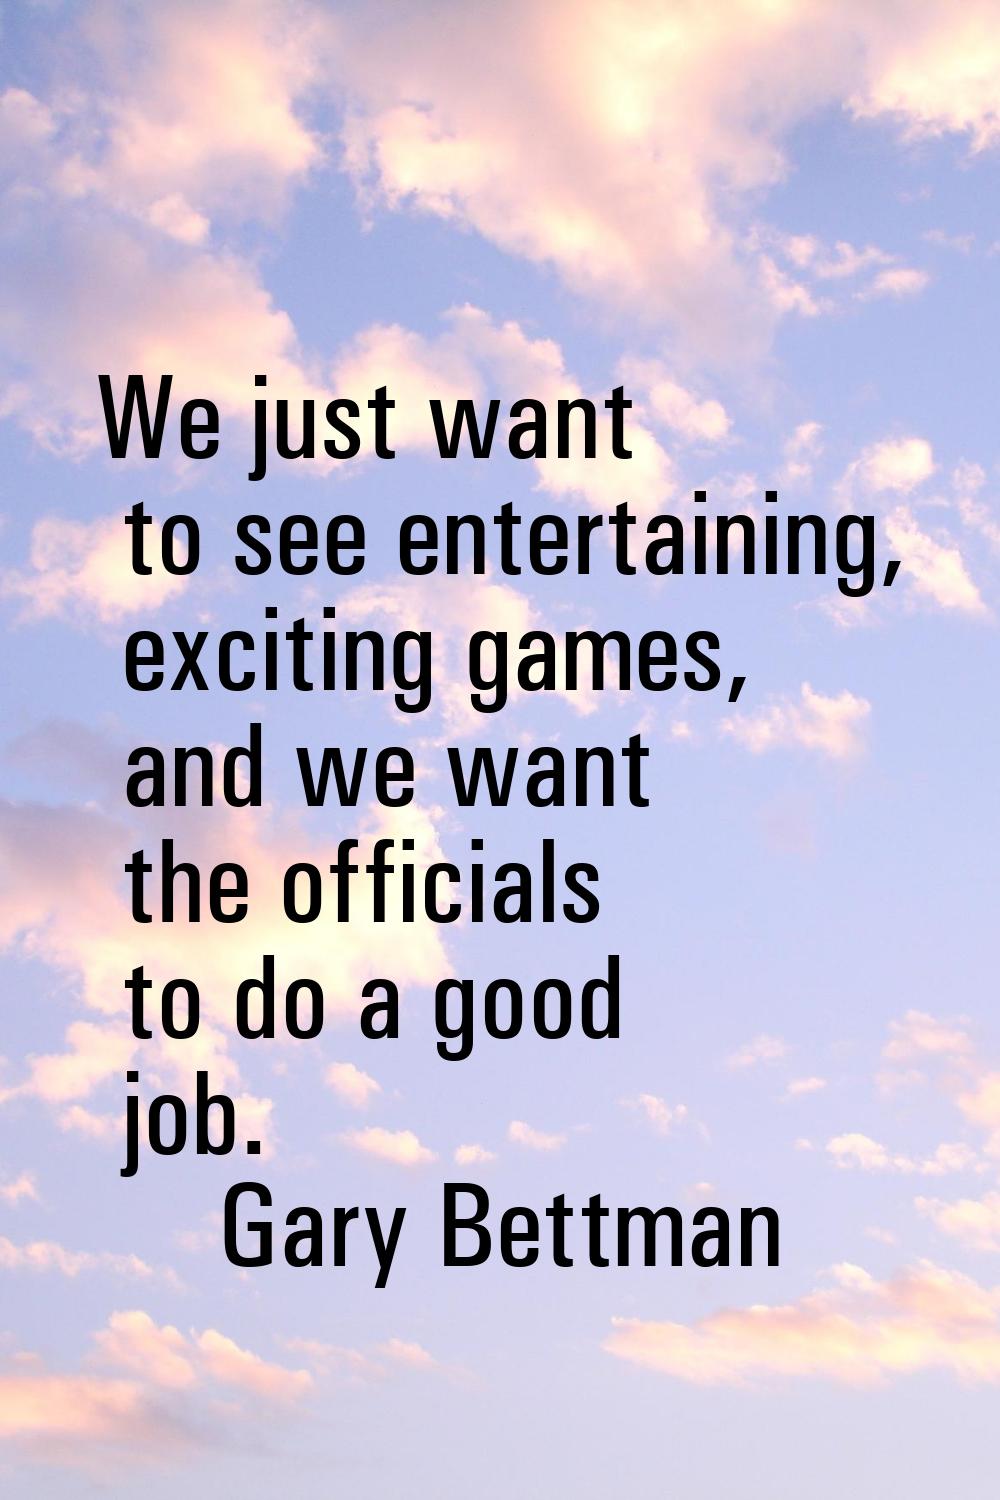 We just want to see entertaining, exciting games, and we want the officials to do a good job.